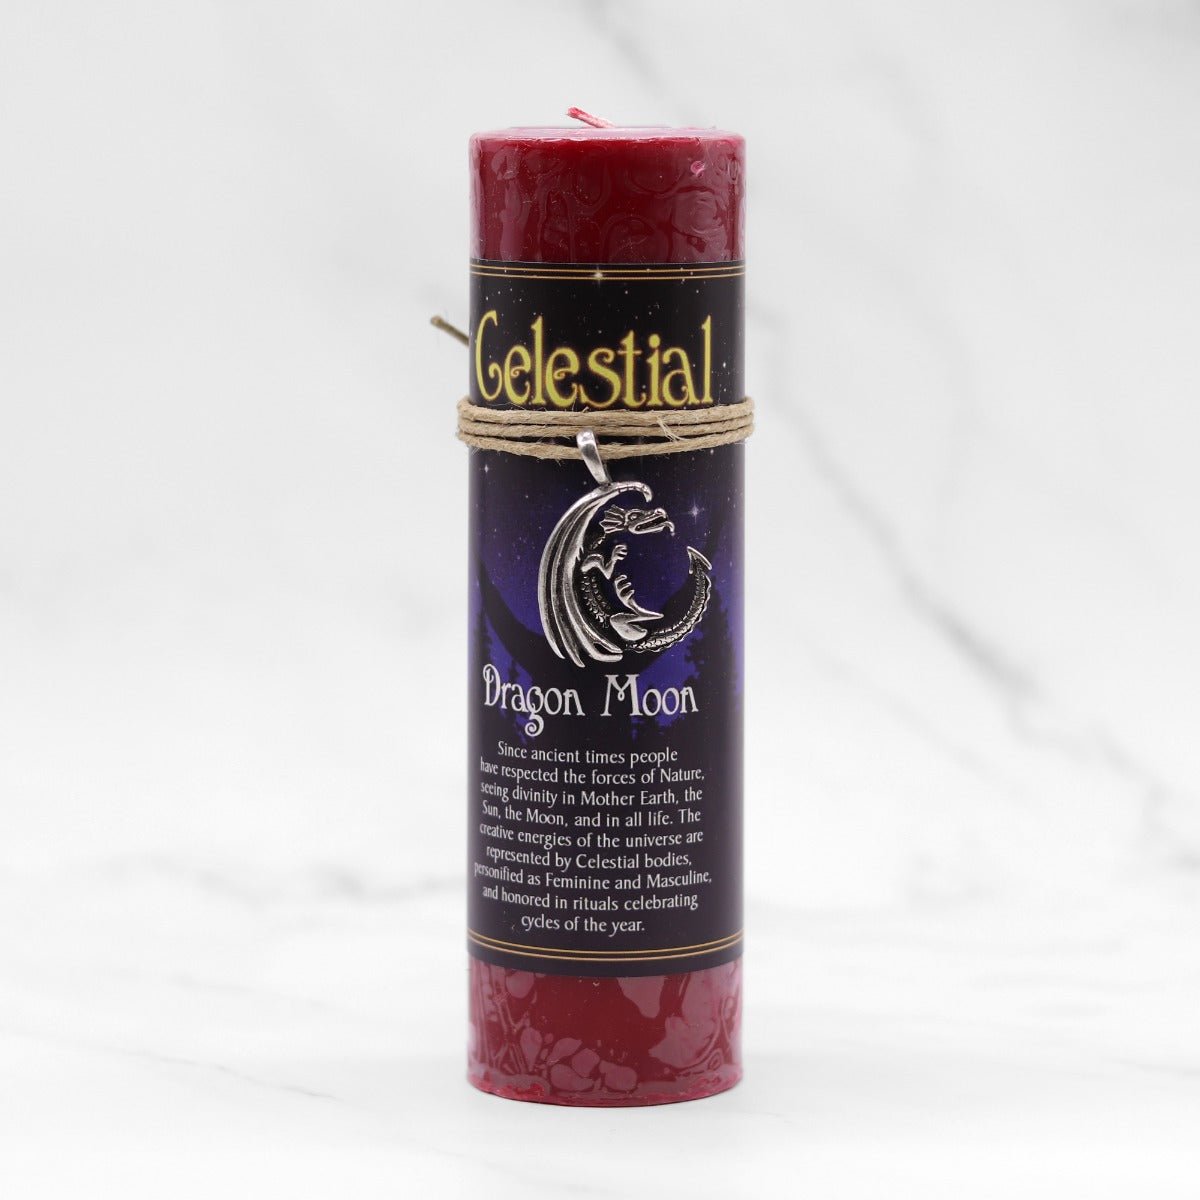 Celestial Dragon Moon Candle with Pendant - 13 Moons